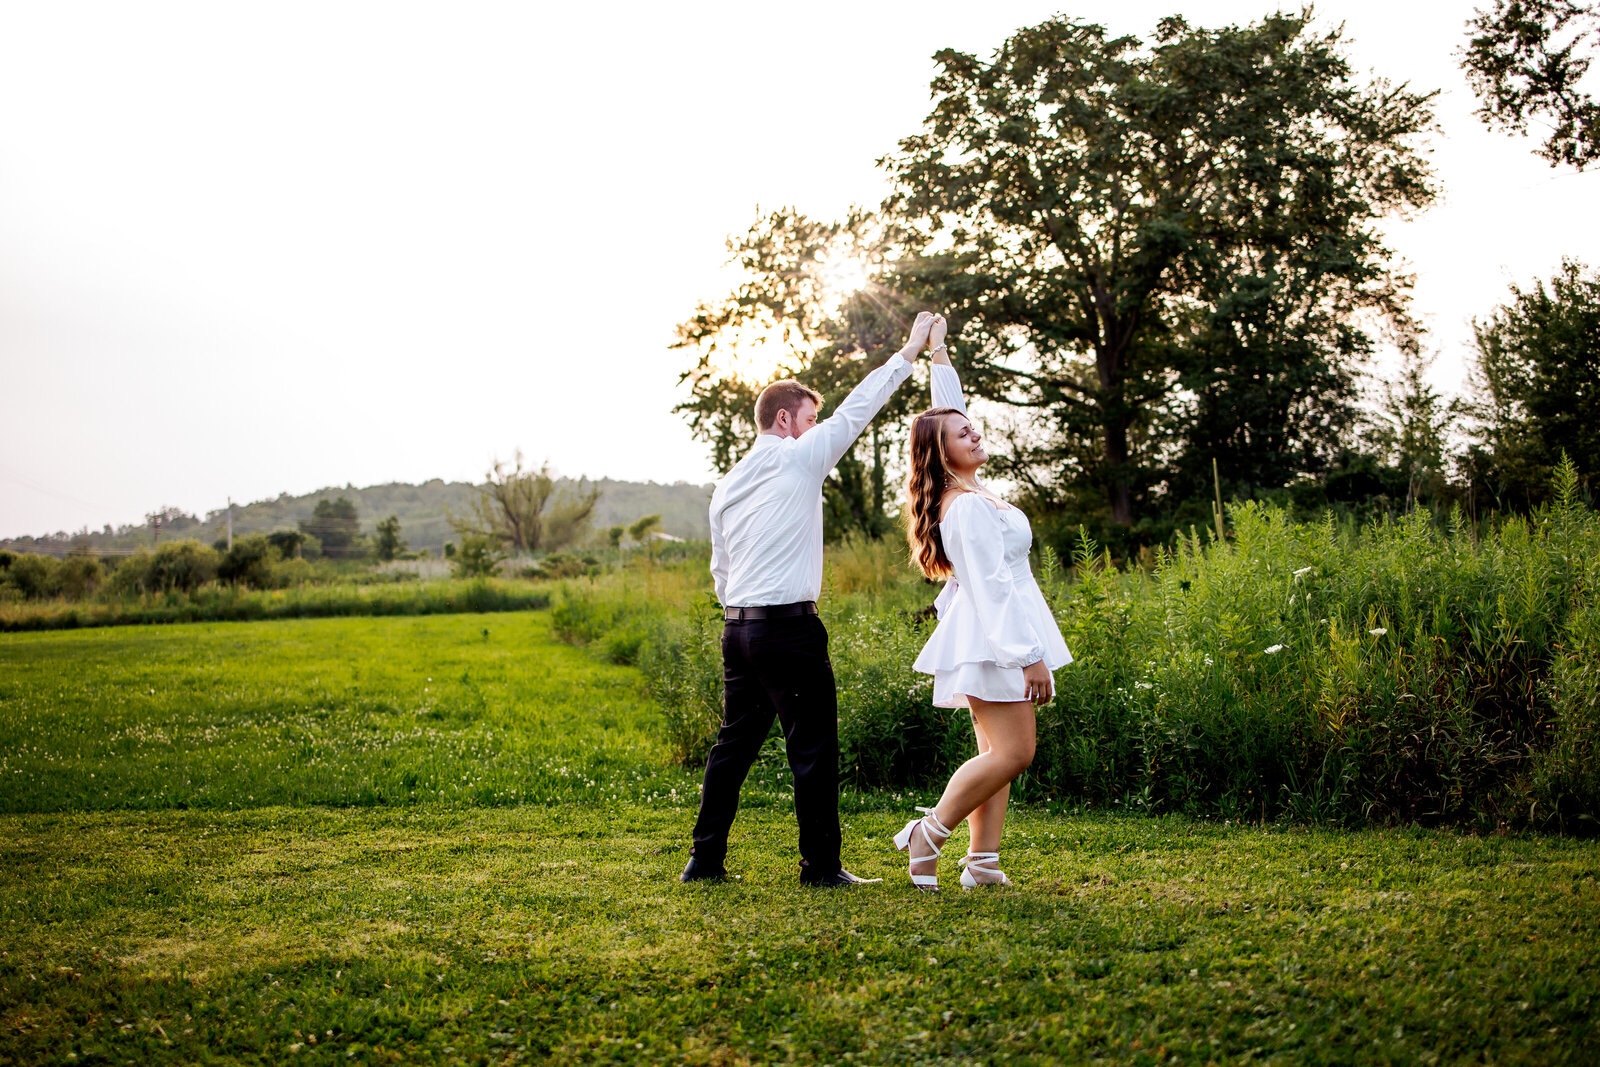 Couple shares a quick dance in a grassy field as the sun is setting